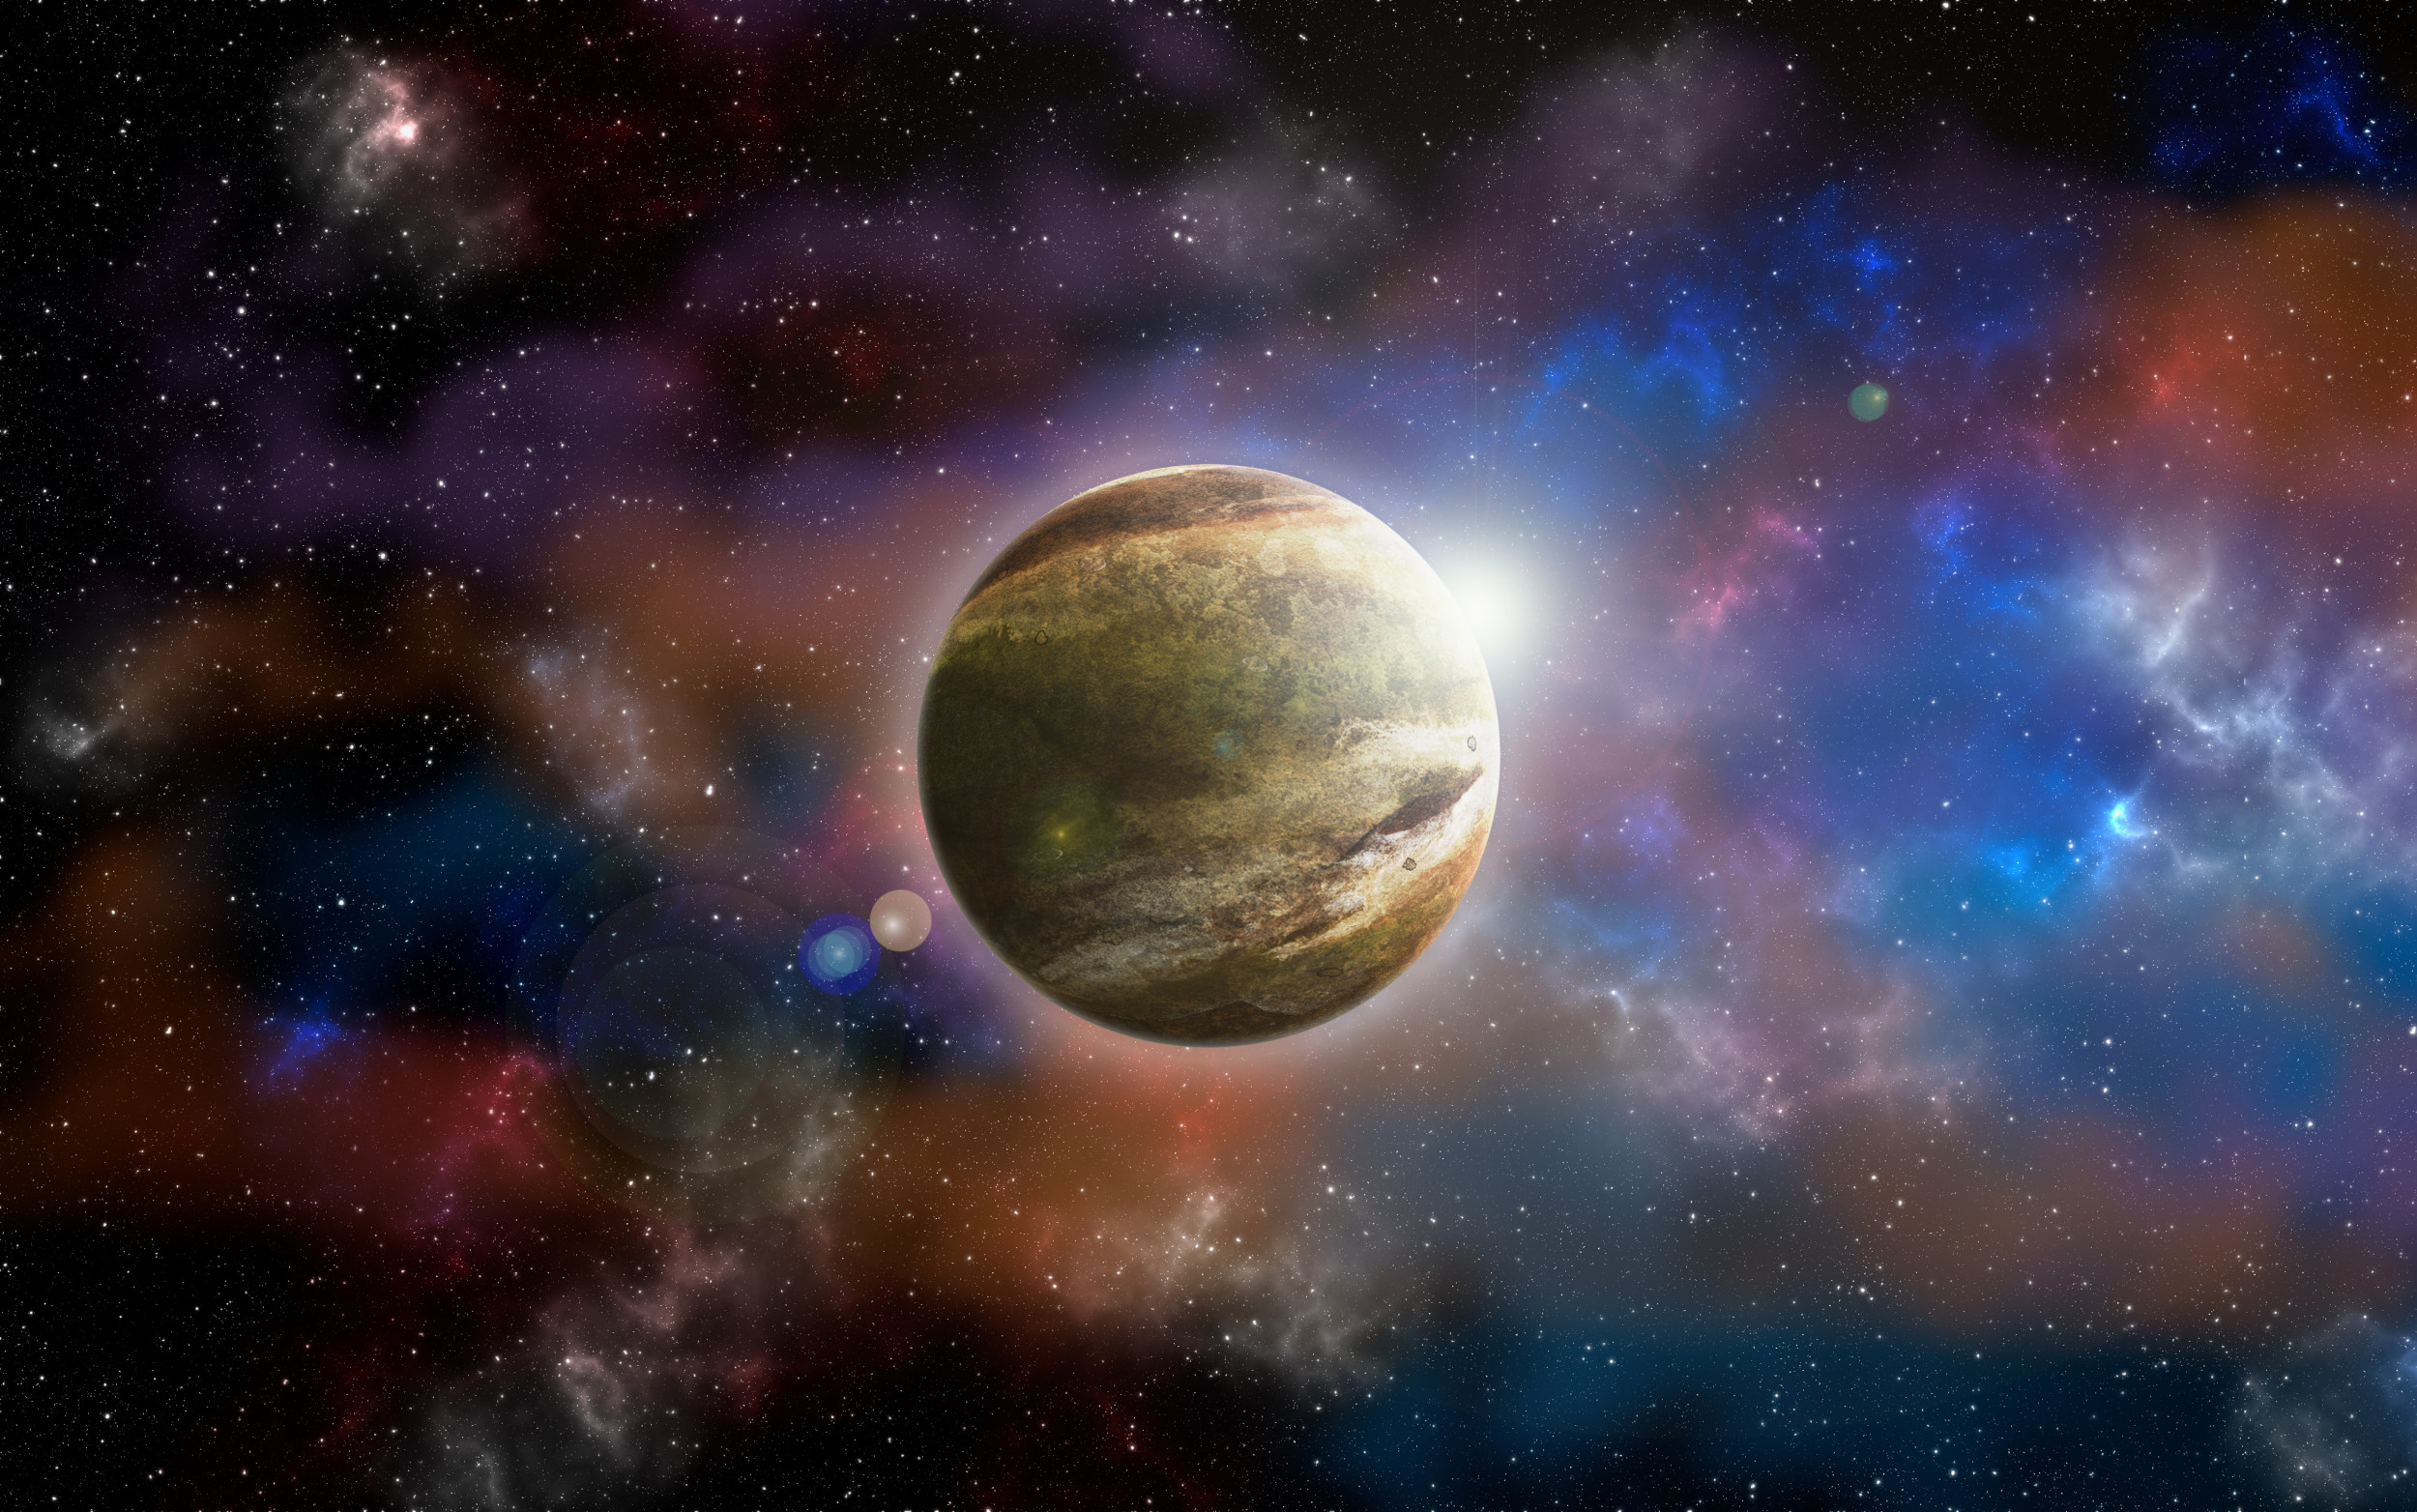 amateur astronomers exoplanet finding